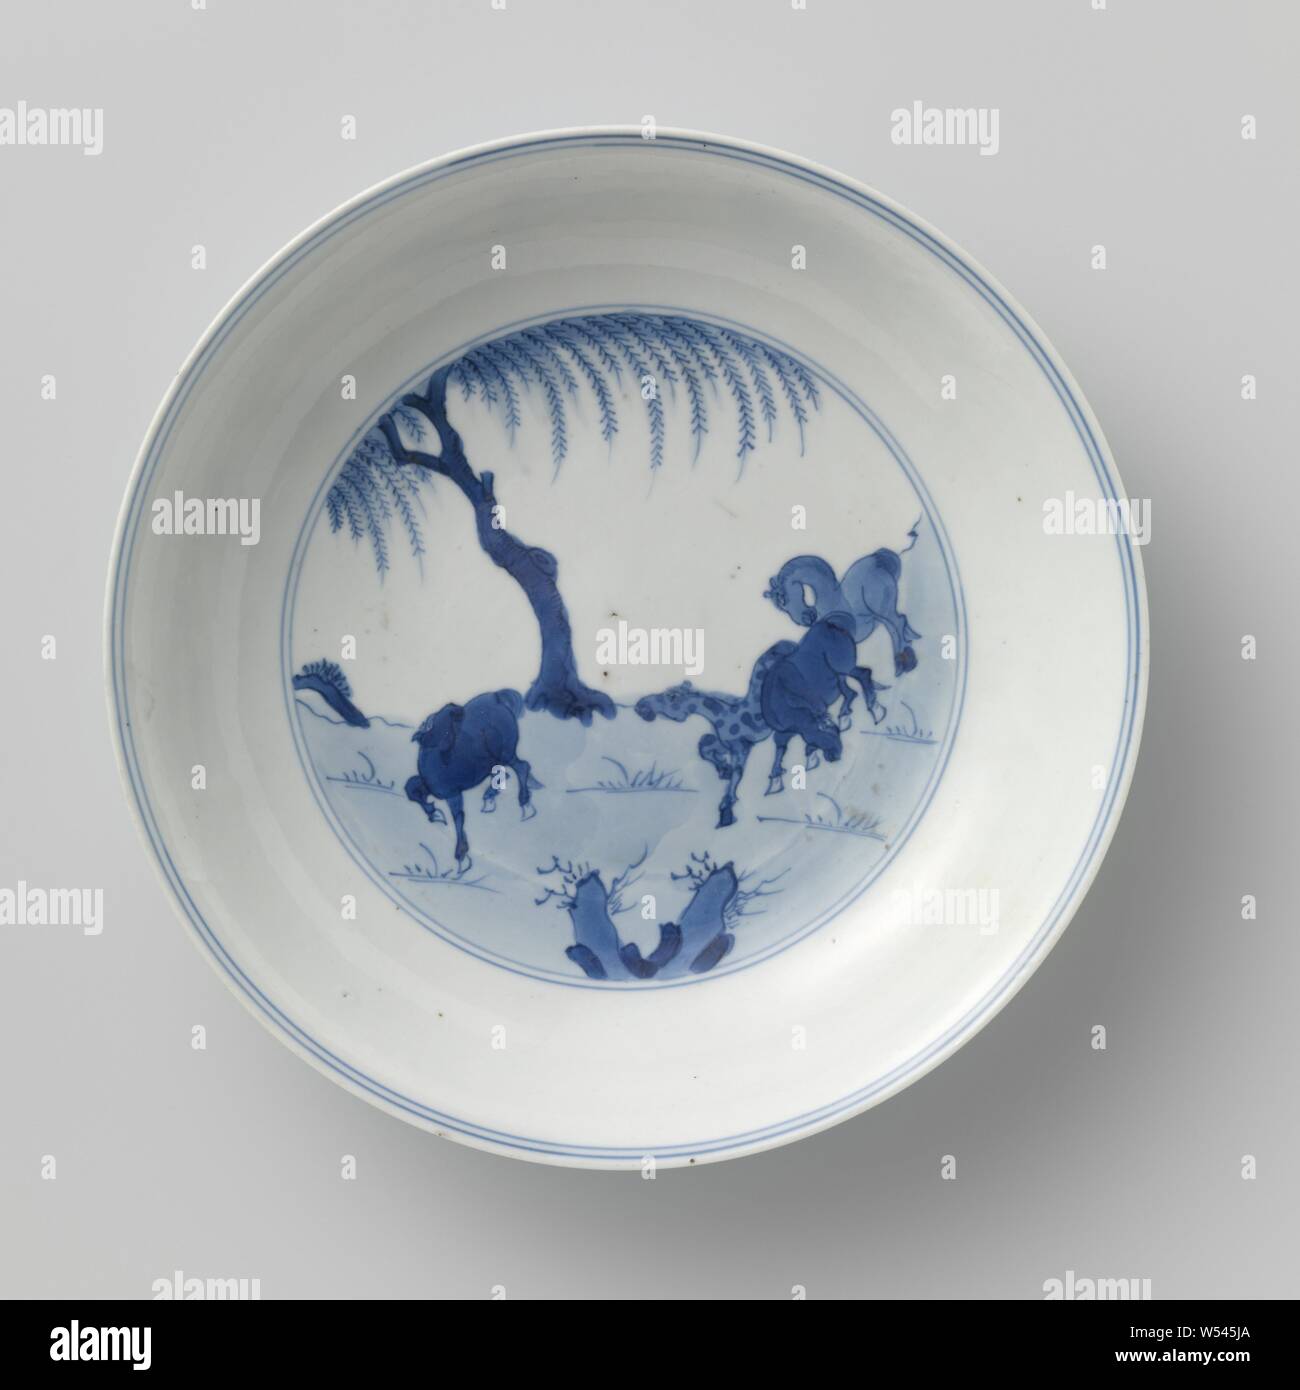 Saucer-dish with horses in a landscape, Porcelain dish with round wall, painted in underglaze blue. On the flat four horses in a landscape with rocks and a tree, the rear with four galloping horses in a landscape with rocks and a tree. Marked on the underside with the six-character mark of Emperor Chenghua in a double circle. Blue White., anonymous, China, c. 1680 - c. 1720, Qing-dynasty (1644-1912) / Kangxi-period (1662-1722), porcelain (material), glaze, cobalt (mineral), vitrification, h 3.4 cm d 16.9 cm d 9.7 cm Stock Photo